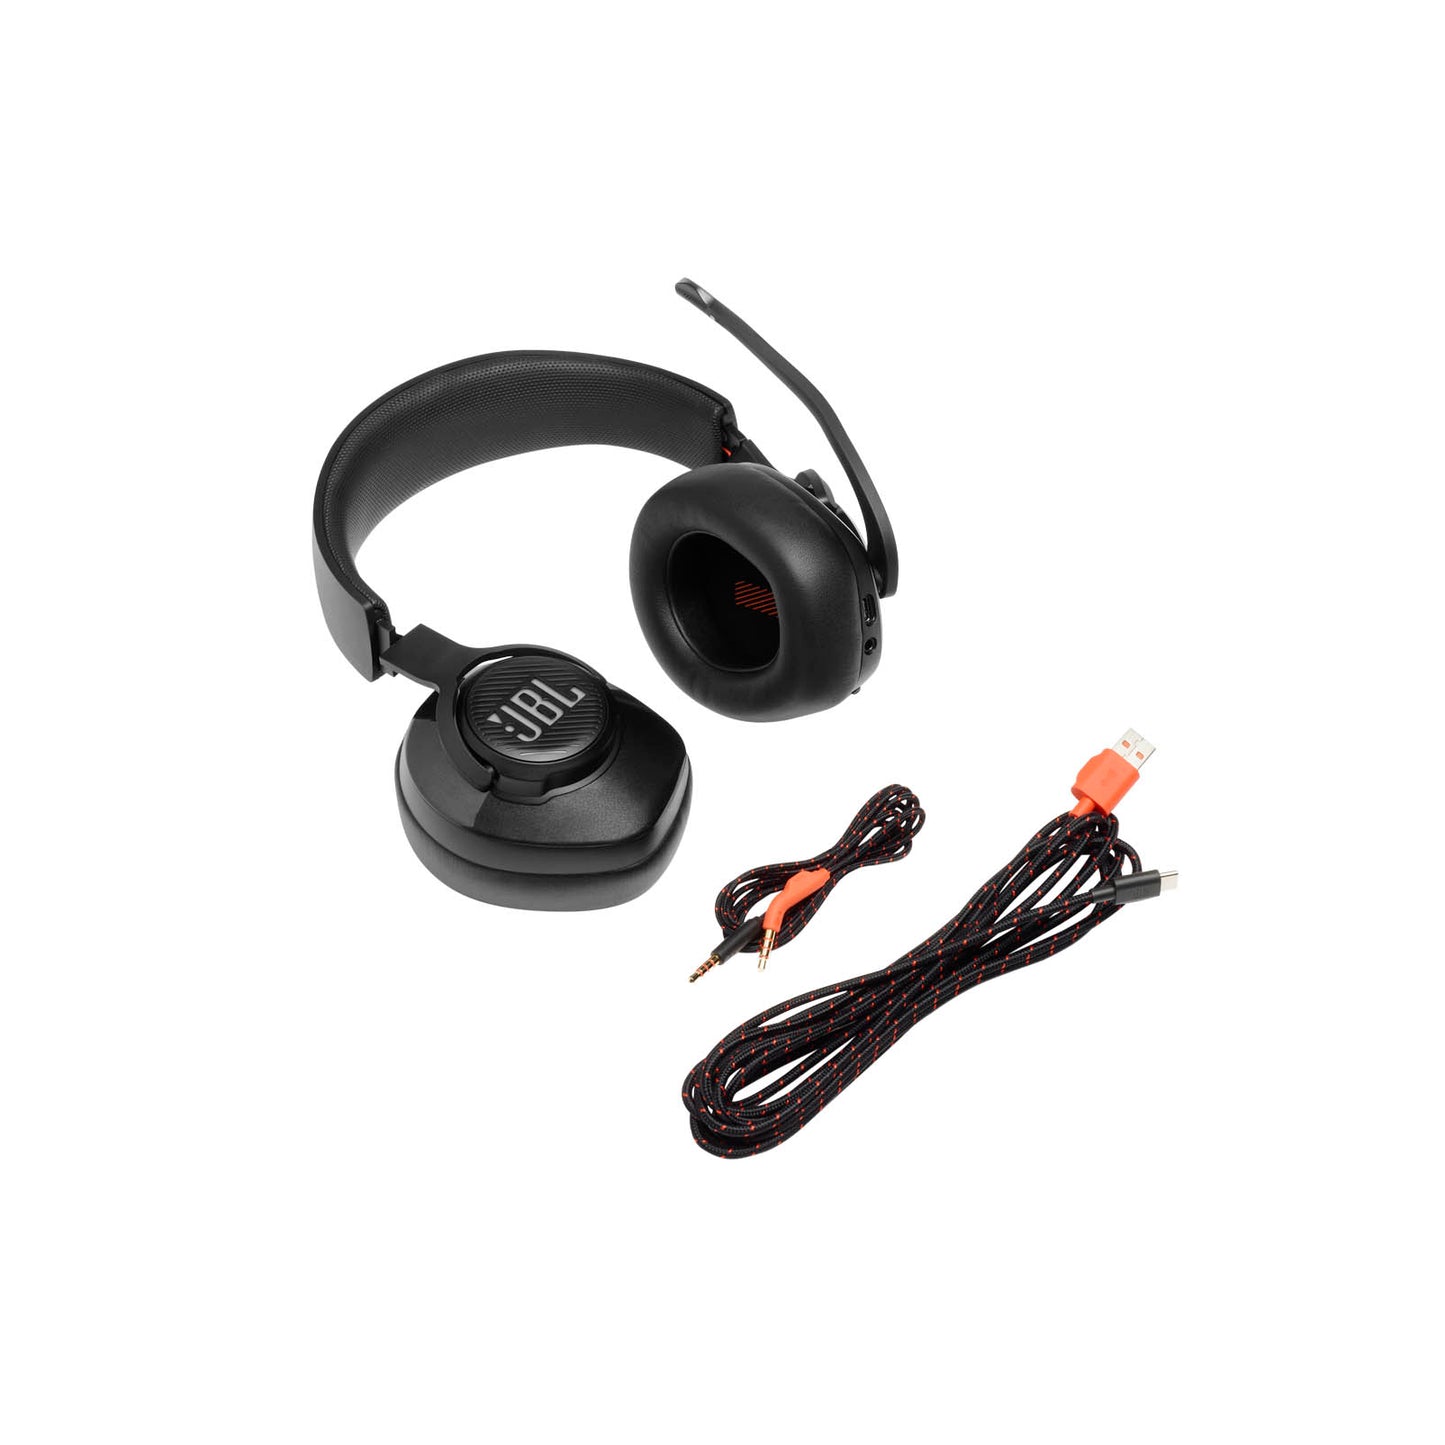 JBL Quantum400 Headphones USB Wired Over-Ear Gaming Headset With Quantumsurround And Rgb Lighting - Black